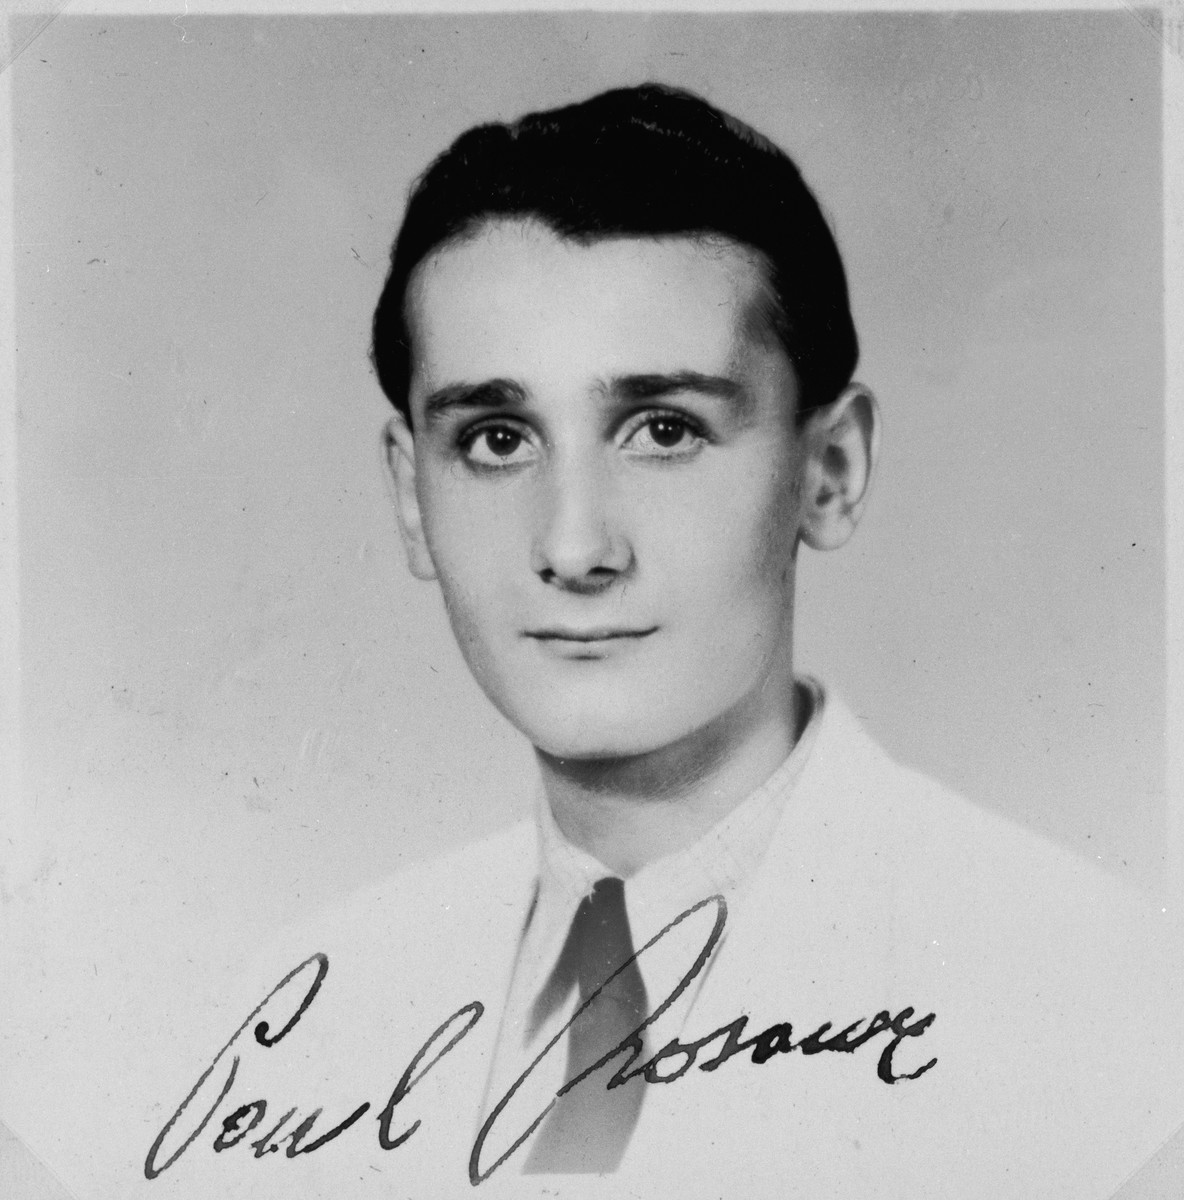 Autographed portrait of Paul Rosauer, a member of the International Committee for European Immigrants in Shanghai.

One photograph from the International Committee album, "Introducing the I.C. Staff" presented to I.C. secretary Paul Komor on August 7, 1941 in Shanghai.